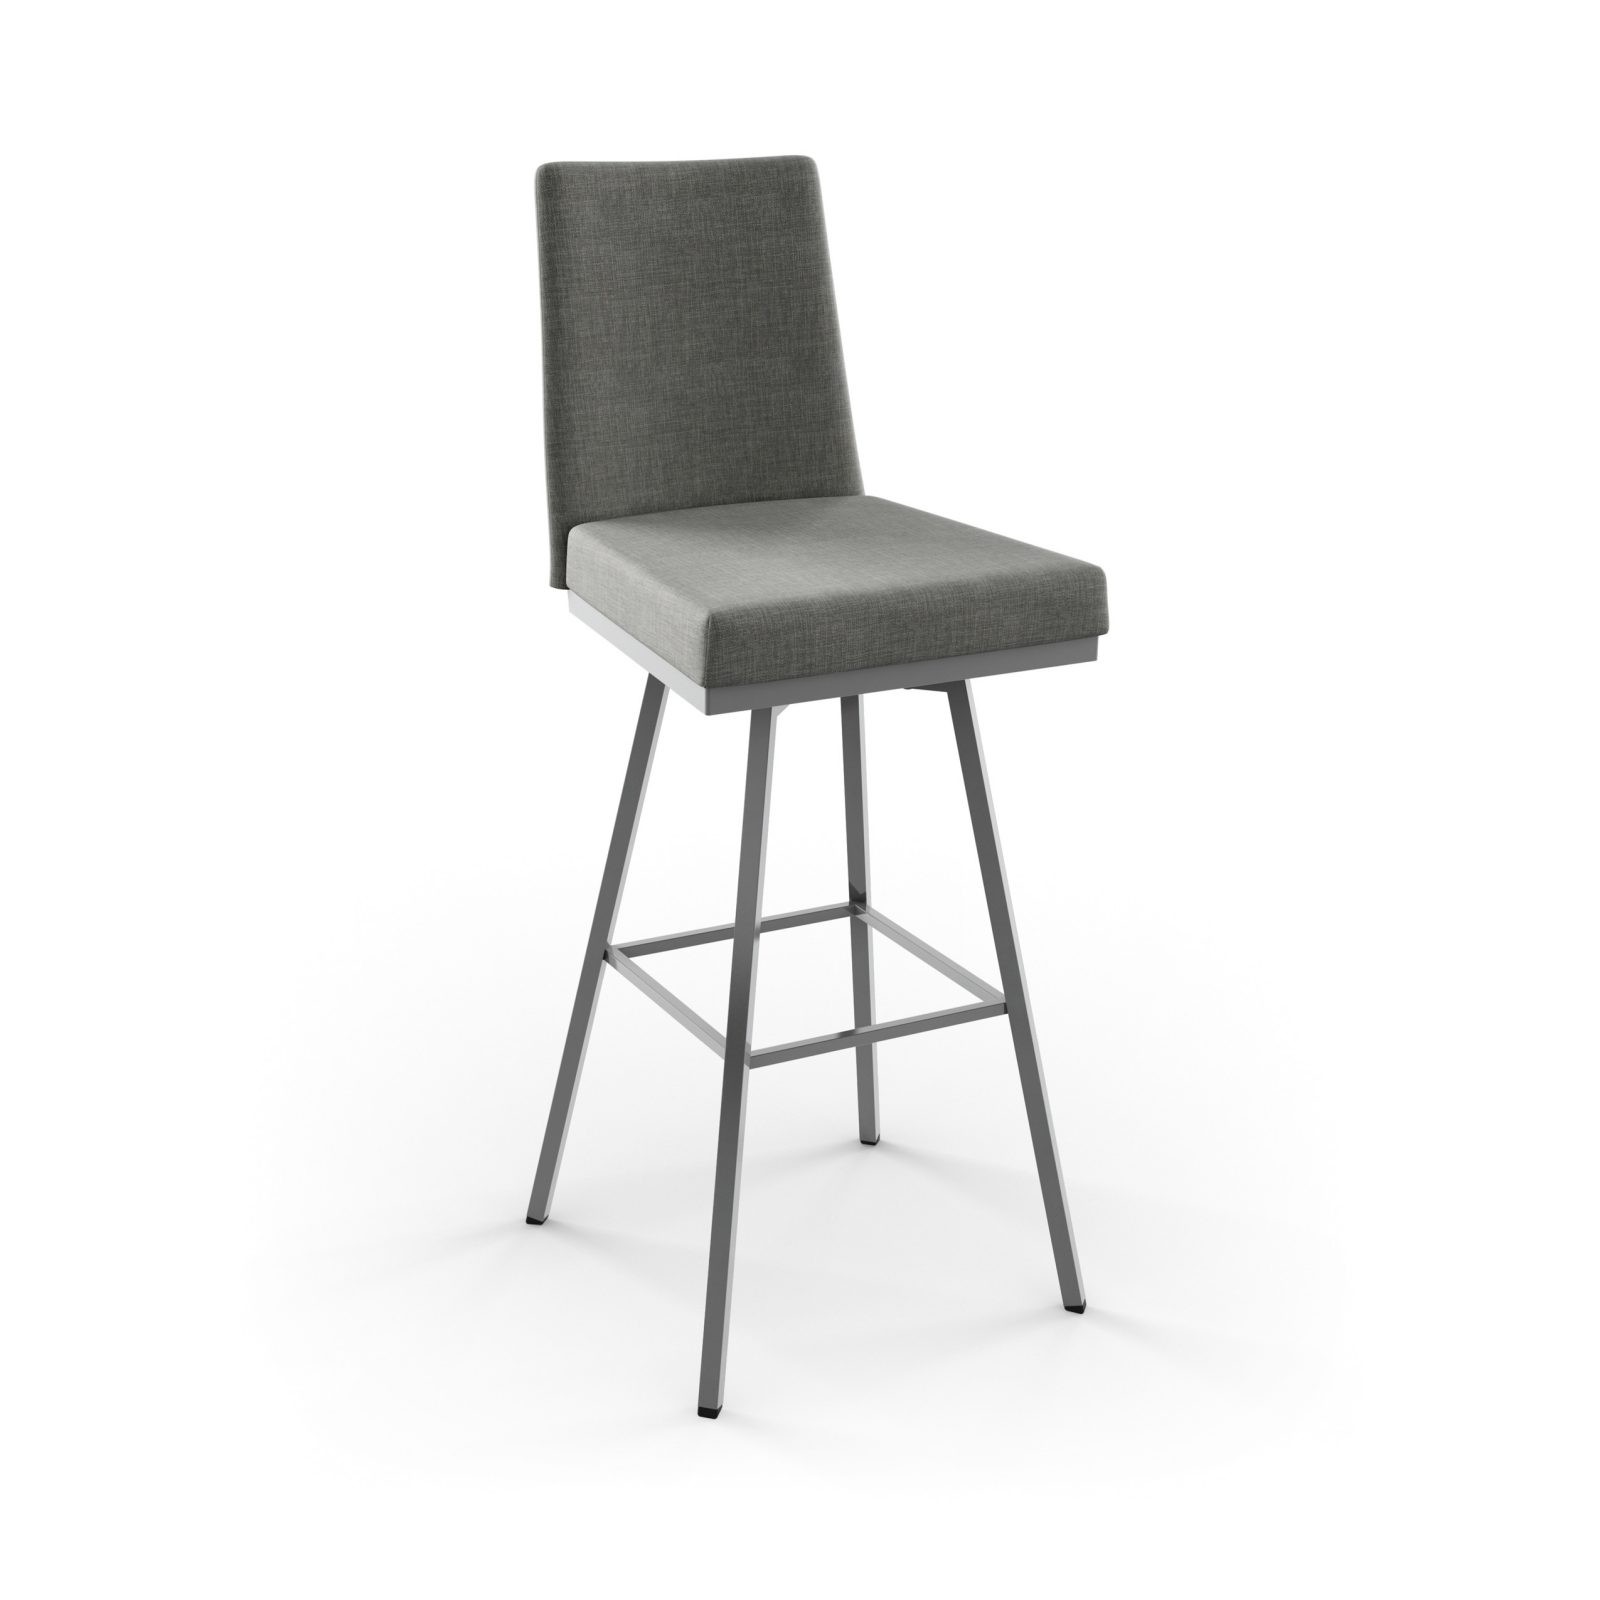 Metal Finish: 24 Magnetite • Seat Covering: BI Ritzy (front and back) (discontinued)